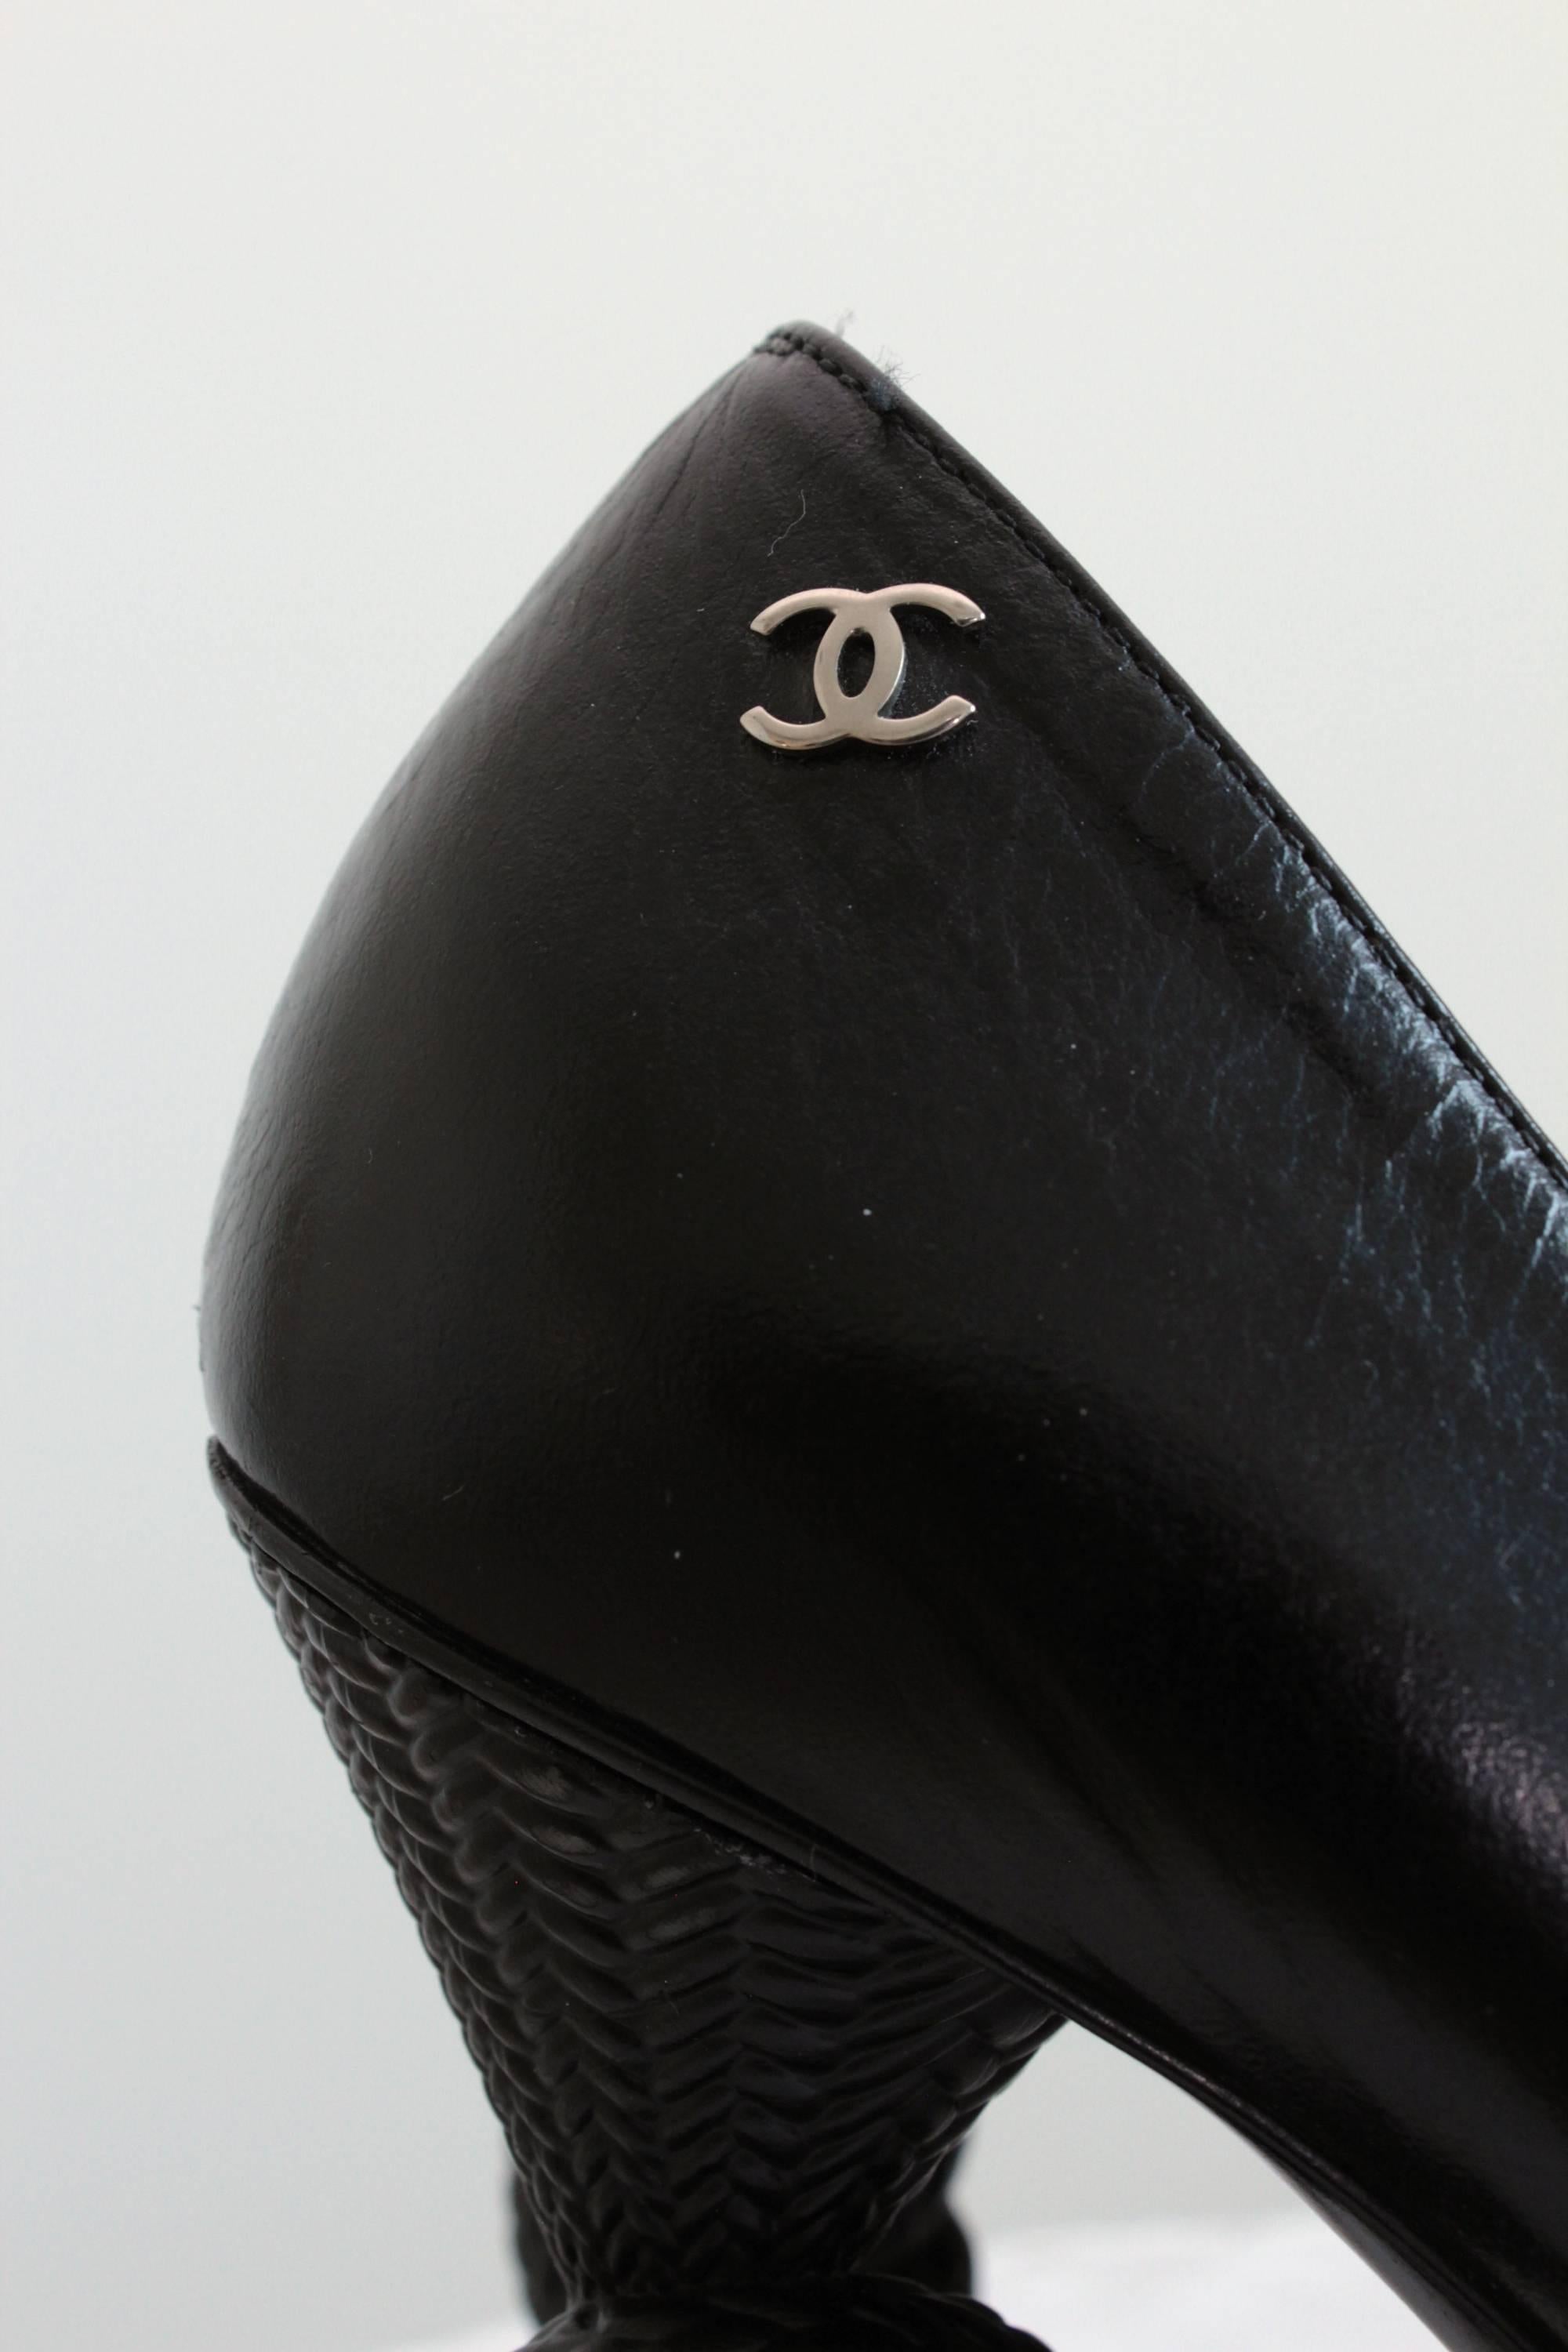 Rare Chanel Knot Heel Shoes Black Leather and Patent 2014 Resort Sz 38.5 6